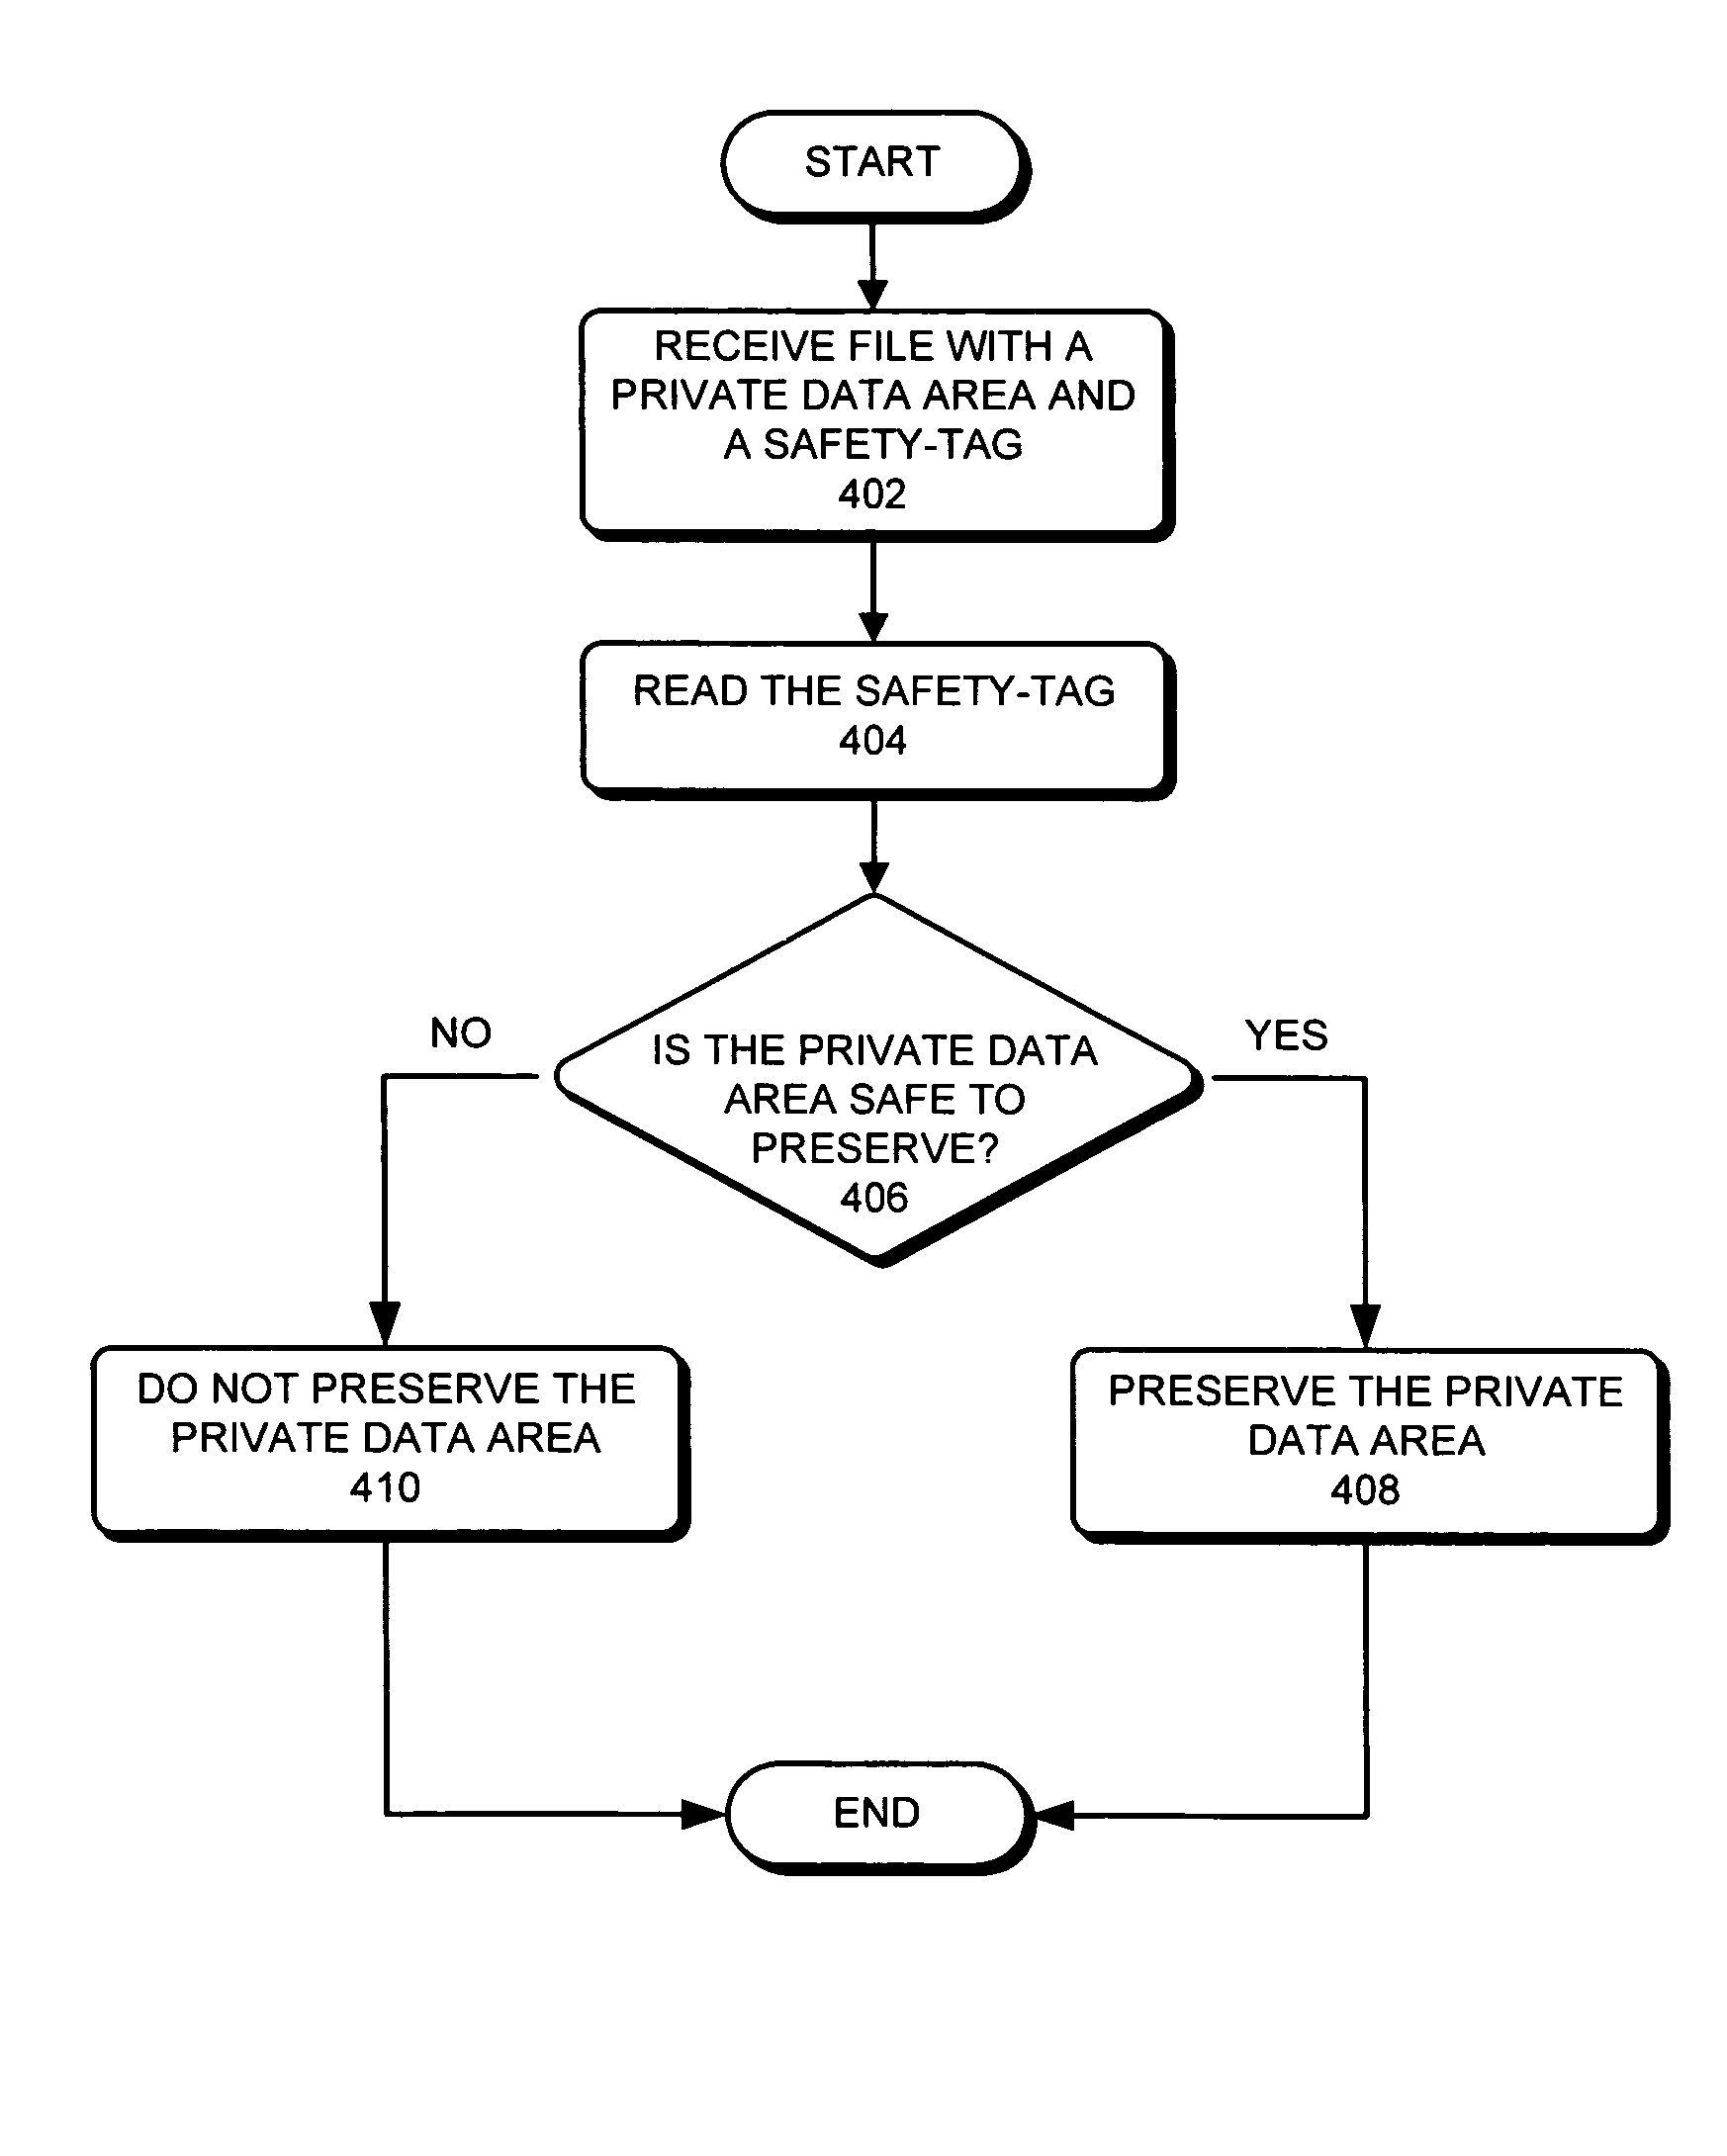 Method and apparatus for determining whether a private data area is safe to preserve